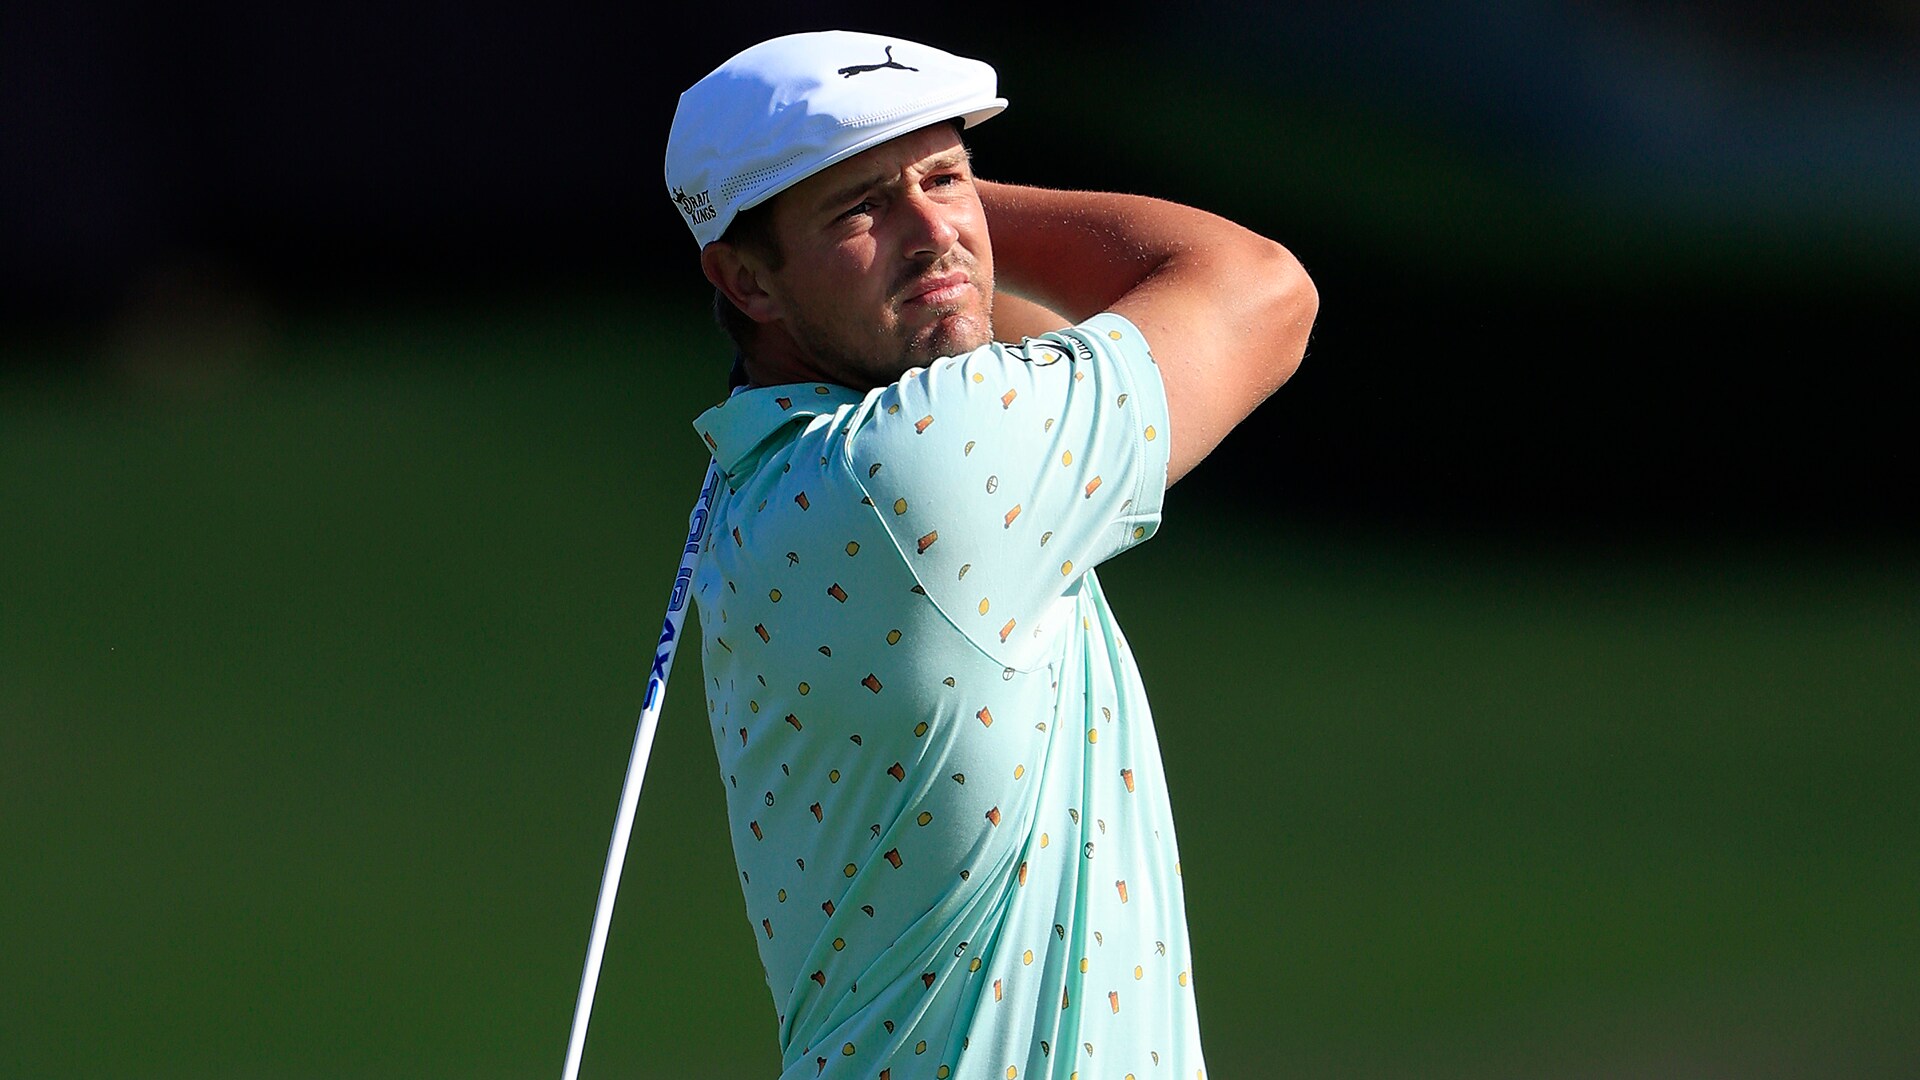 After another tease at No. 6, Bryson DeChambeau may be close to finally pulling trigger 2